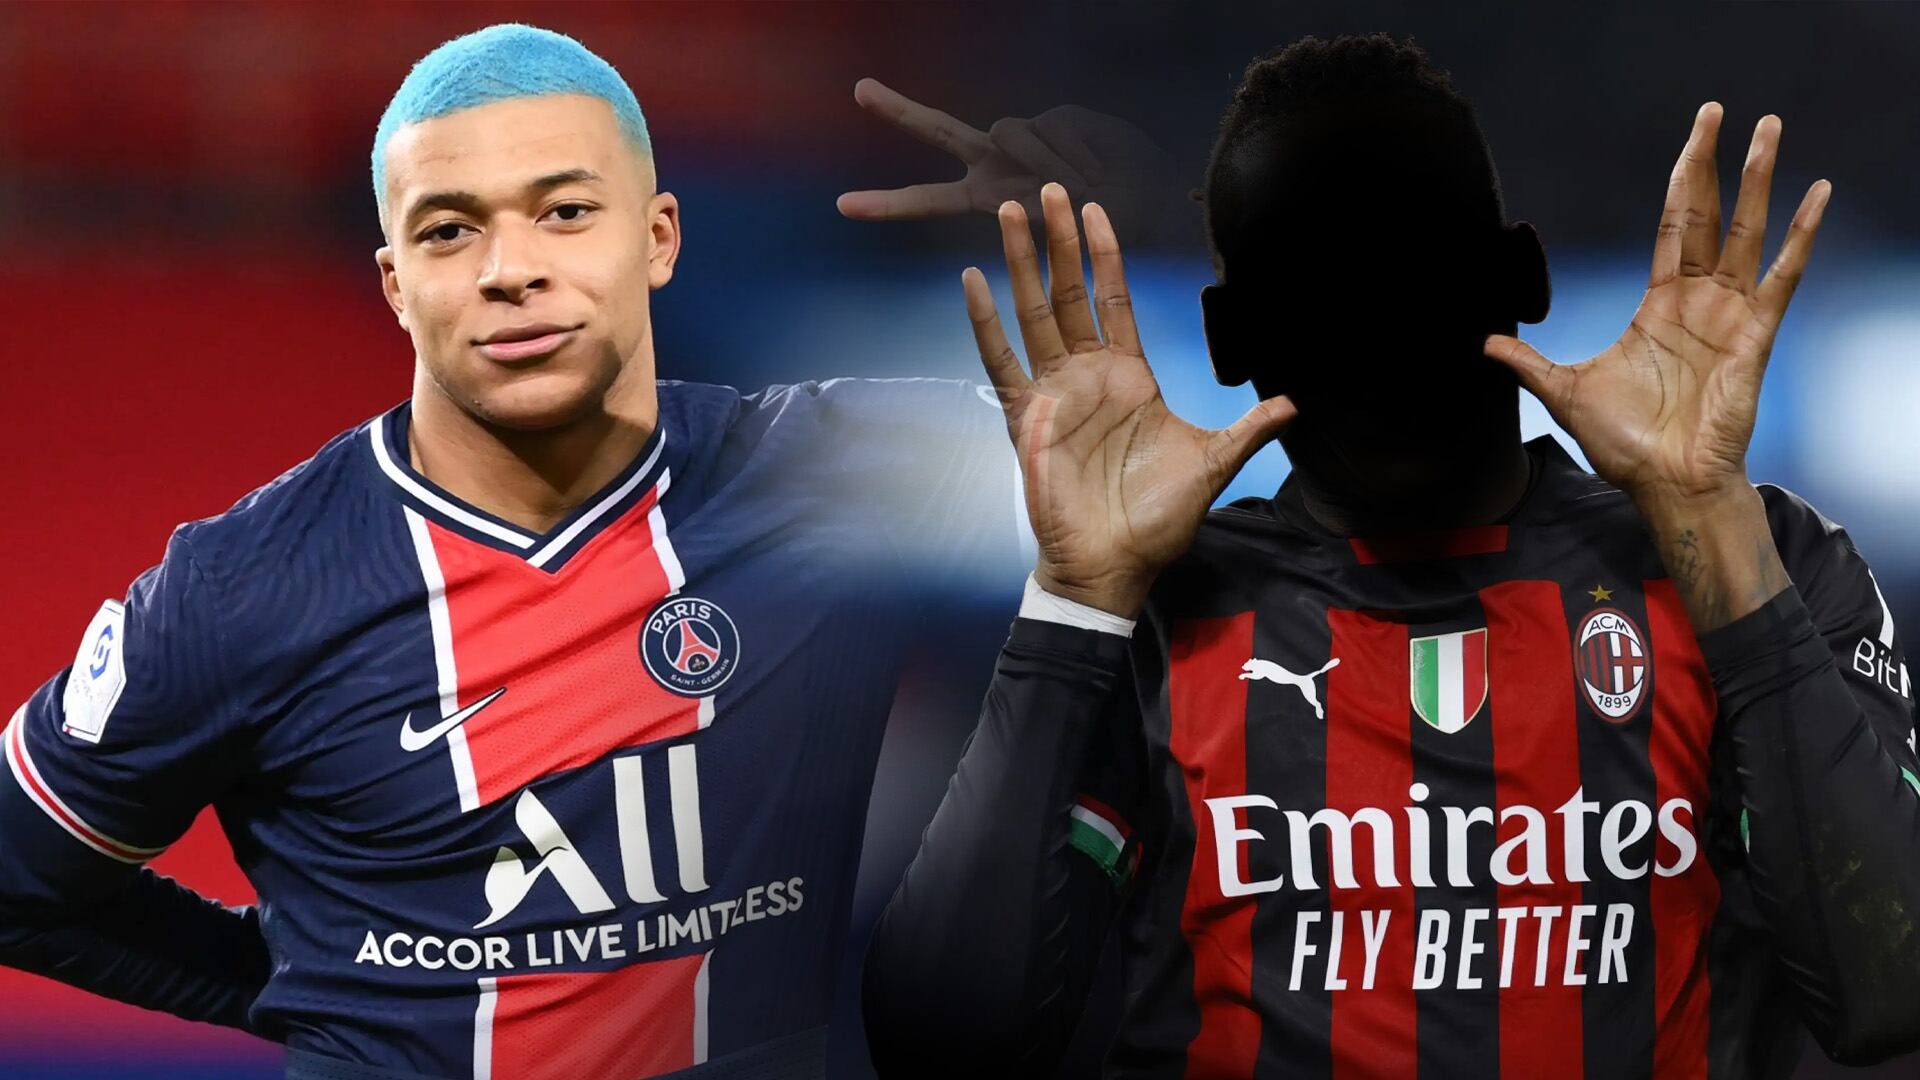 Bye Bye Kylian Mbappe, the new Cristiano Ronaldo is about to arrive at PSG